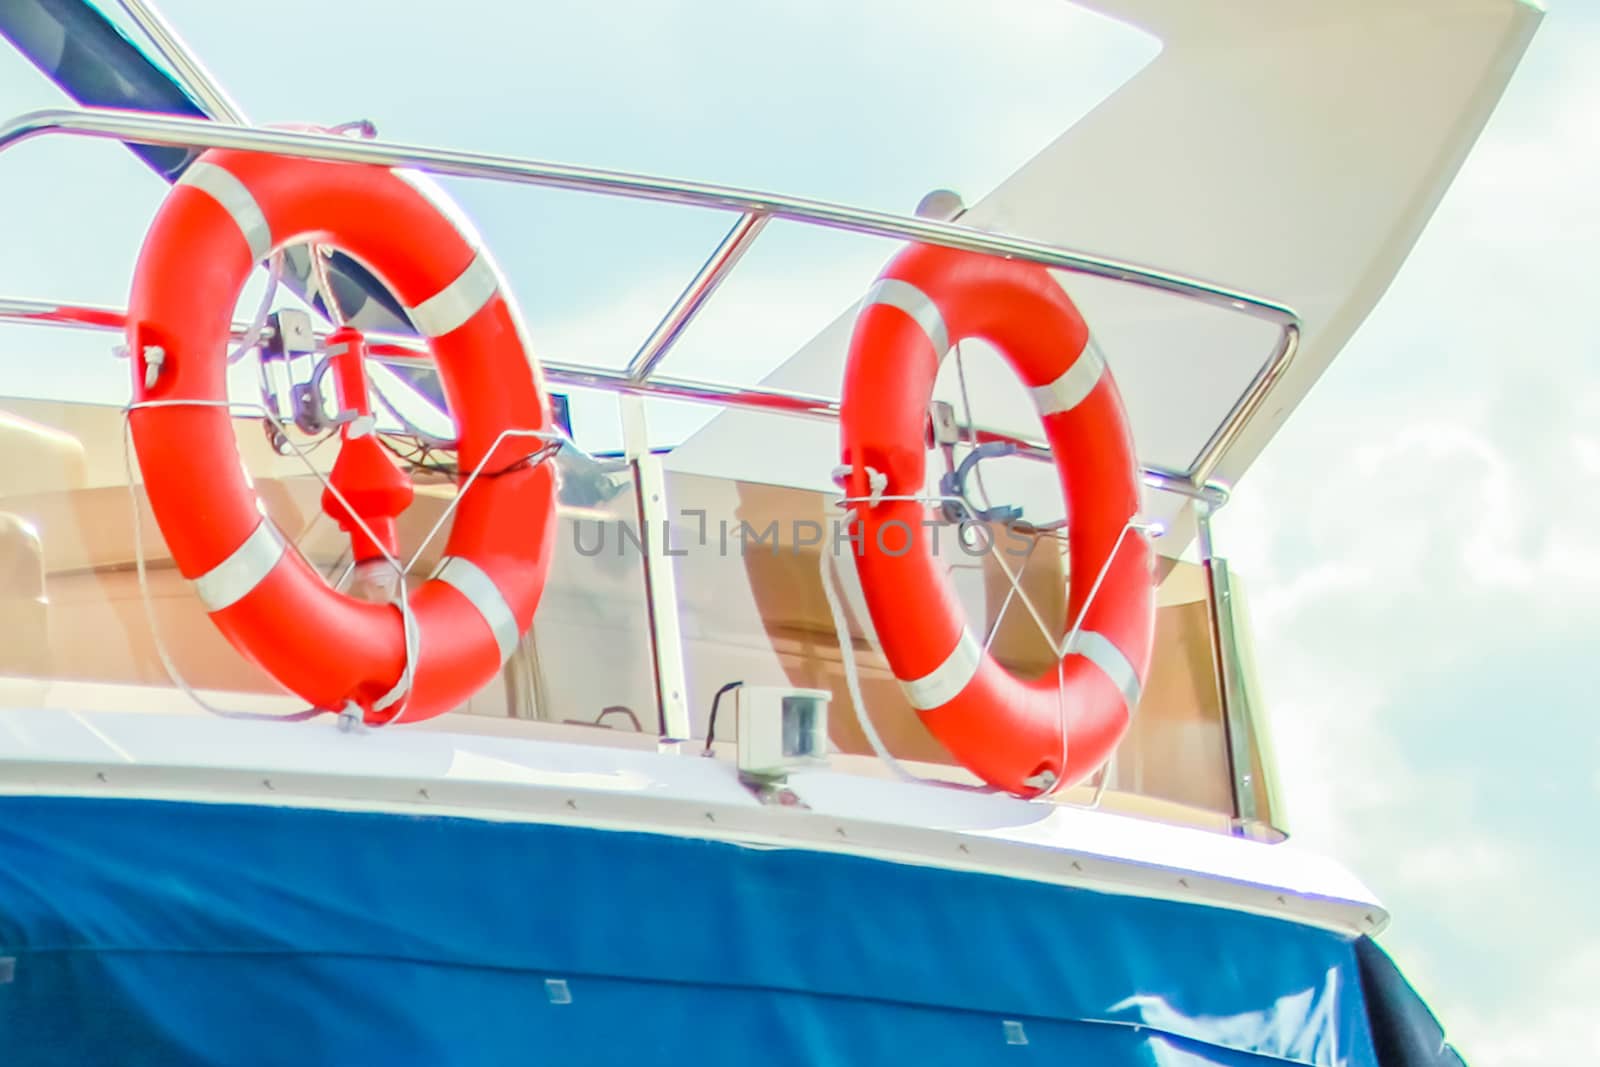 Two circles to save drowning. Taking care of safety on the ship.